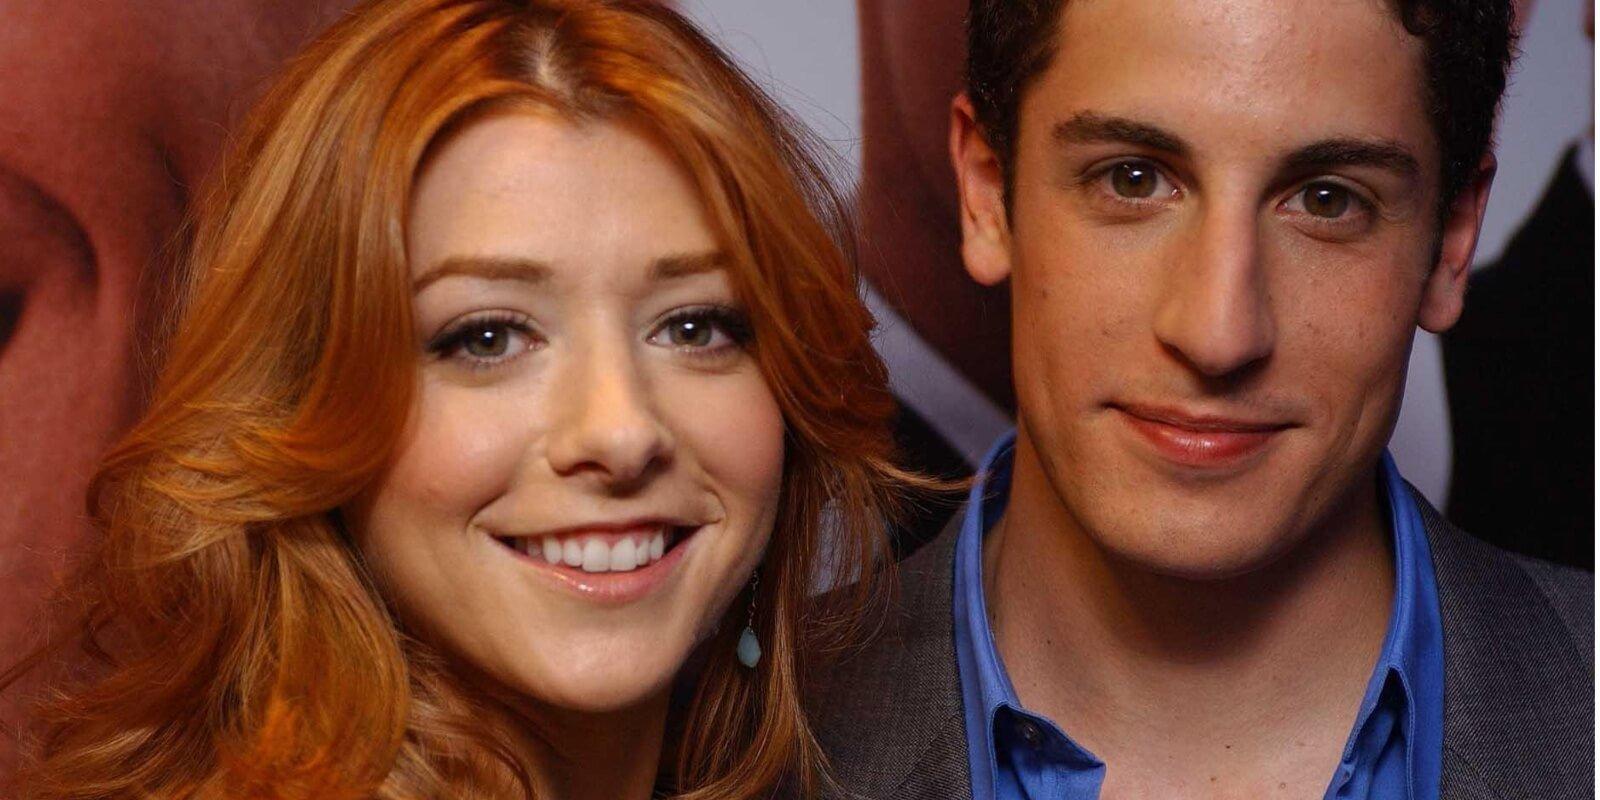 Alyson Hannigan and Jason Biggs were part of the cast of the film series